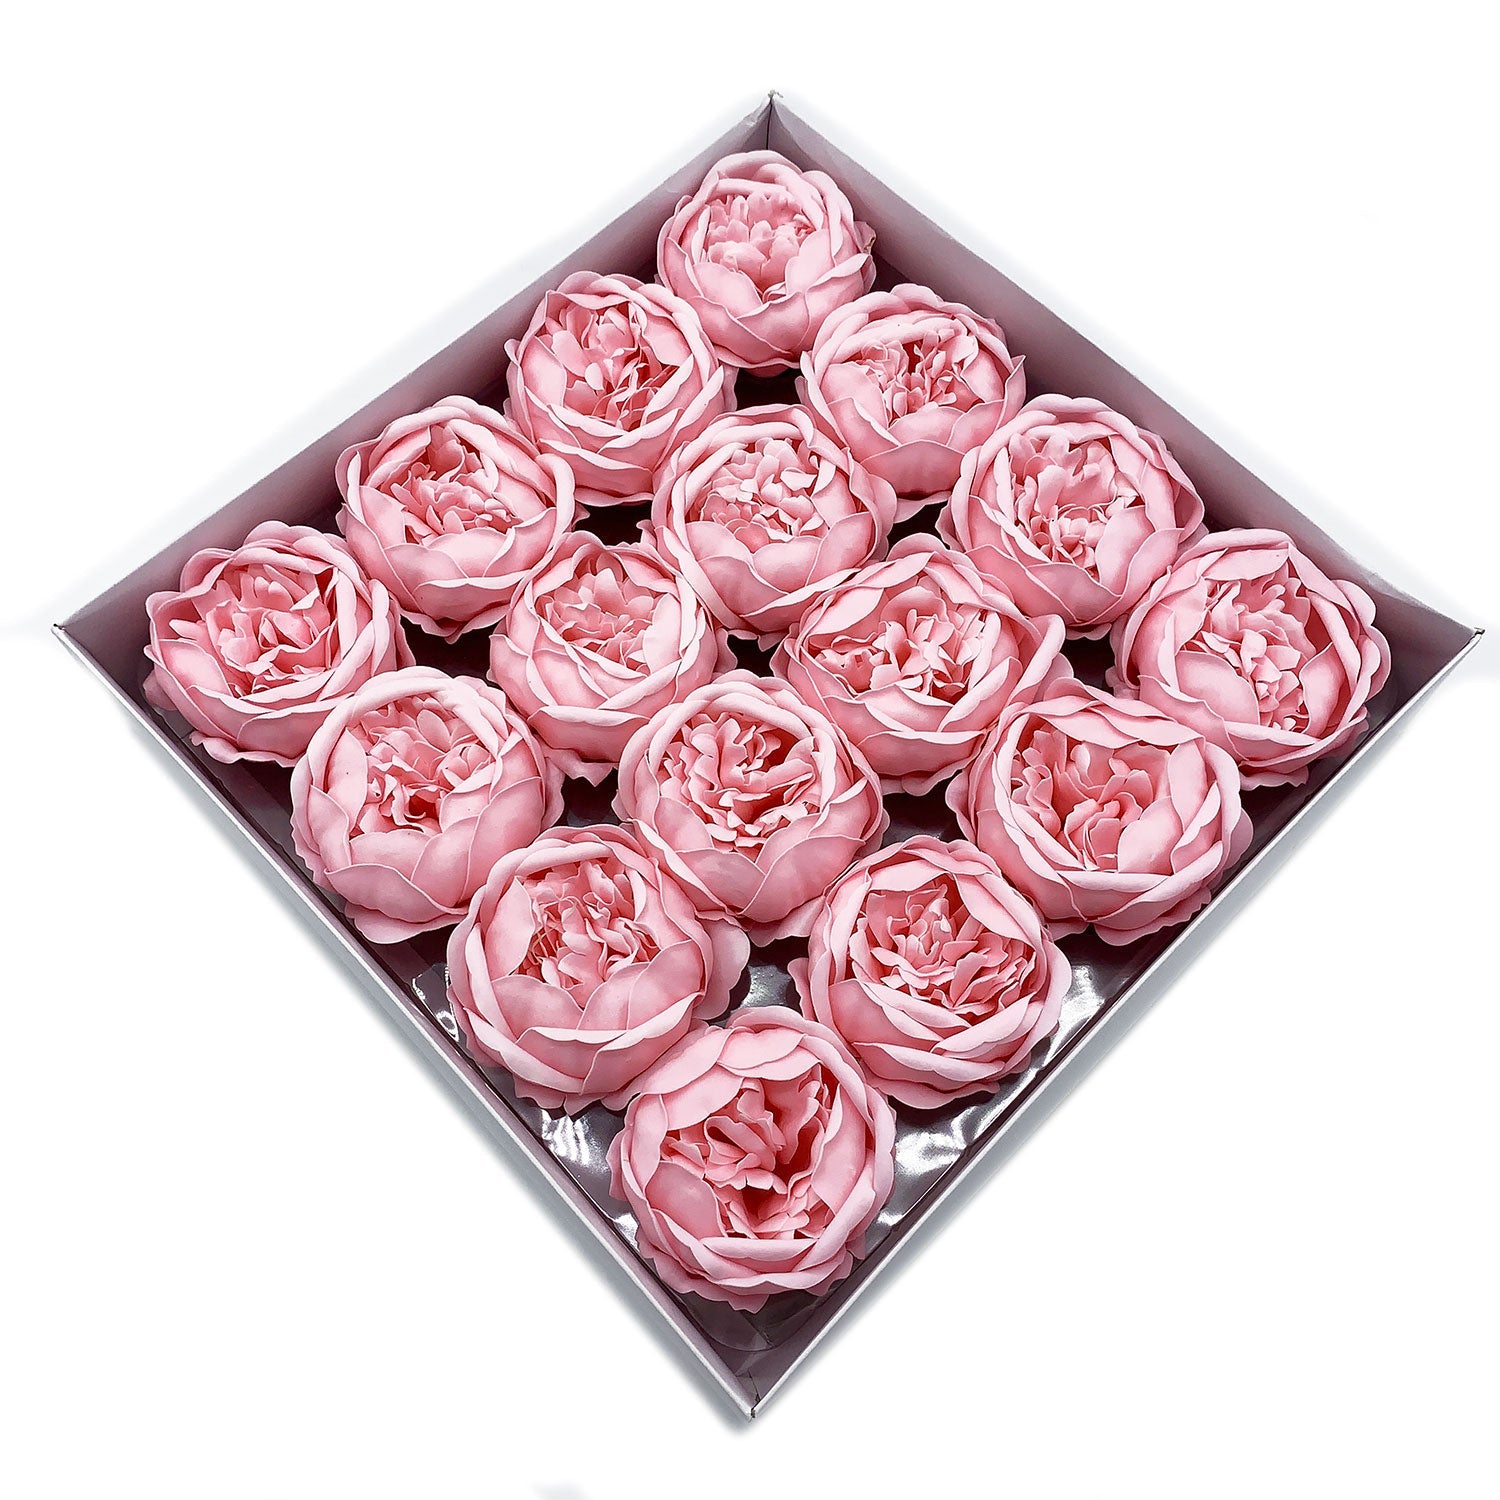 Craft Soap Flower - Ext Large Peony - Pink - £38.0 - 